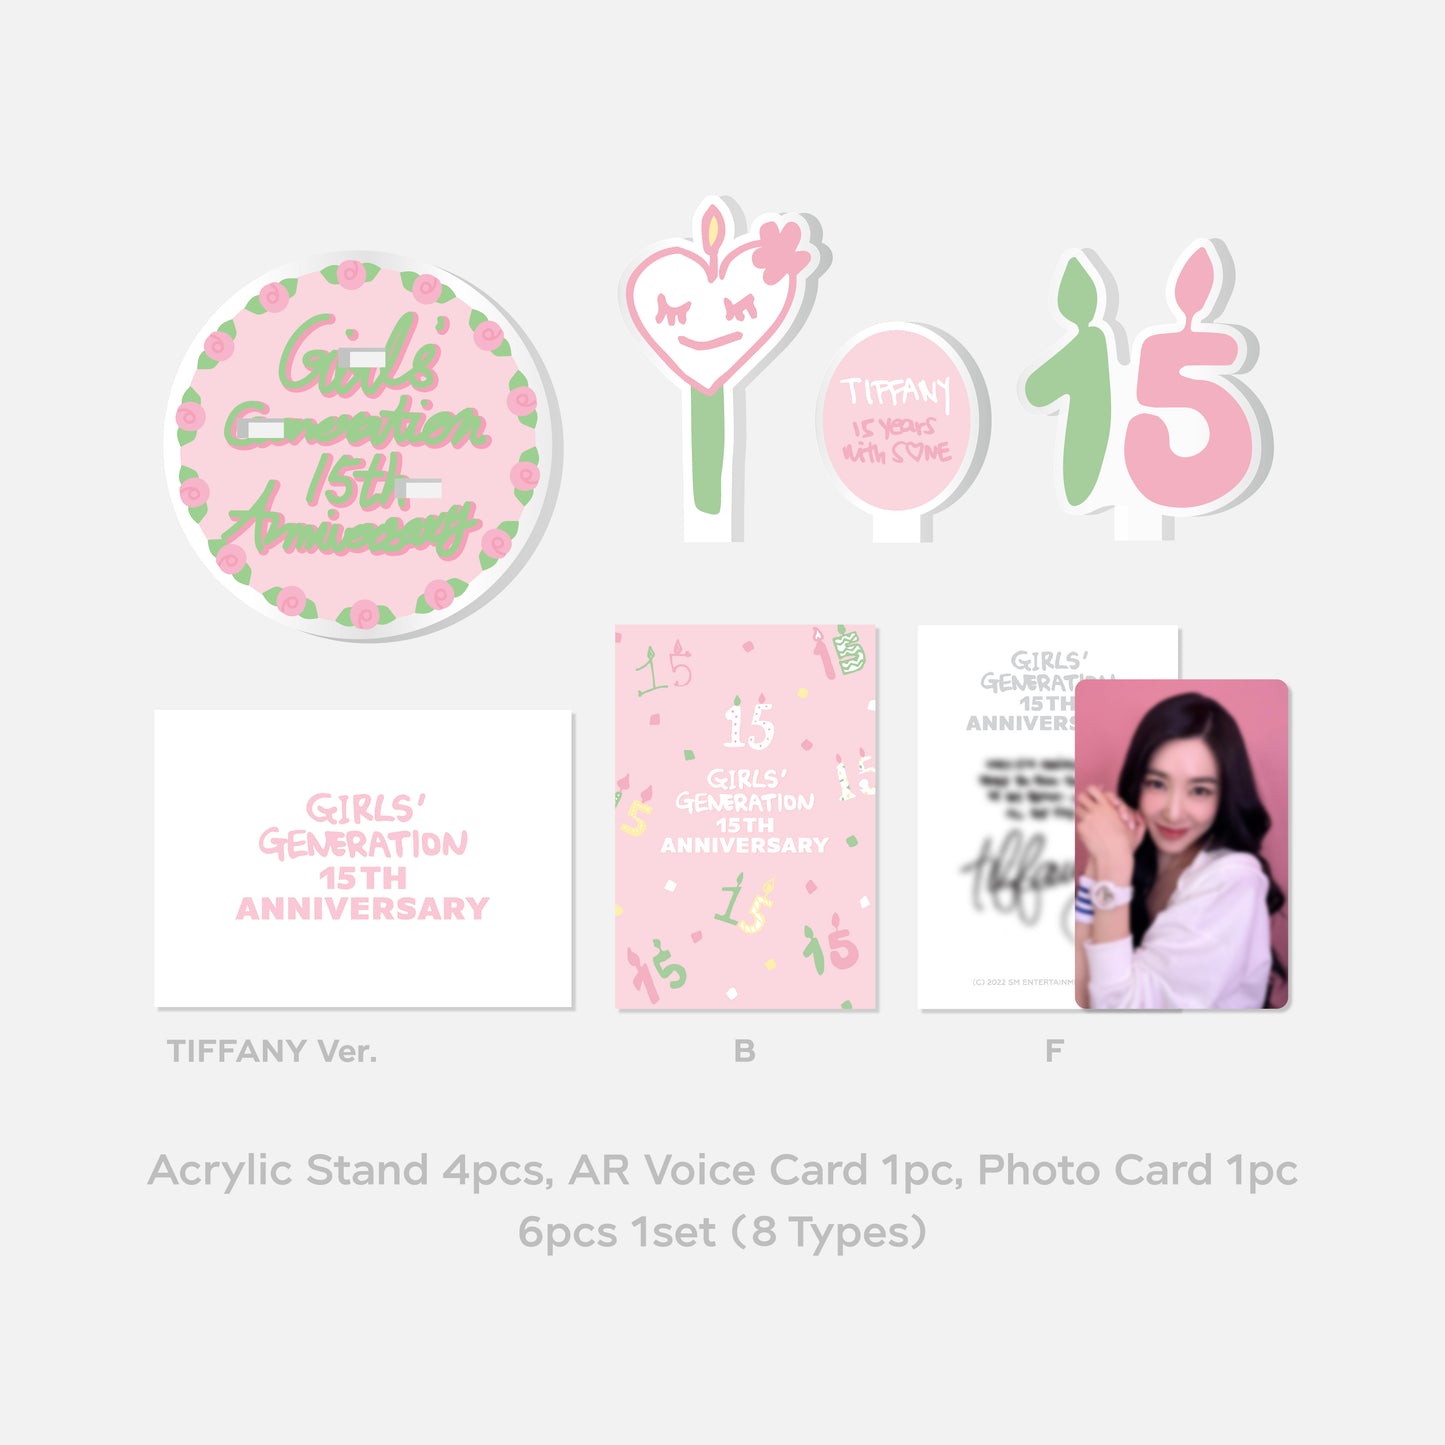 GIRL'S GENERATION 15th Anniversary Acrylic Stand & AR Voice Card Set